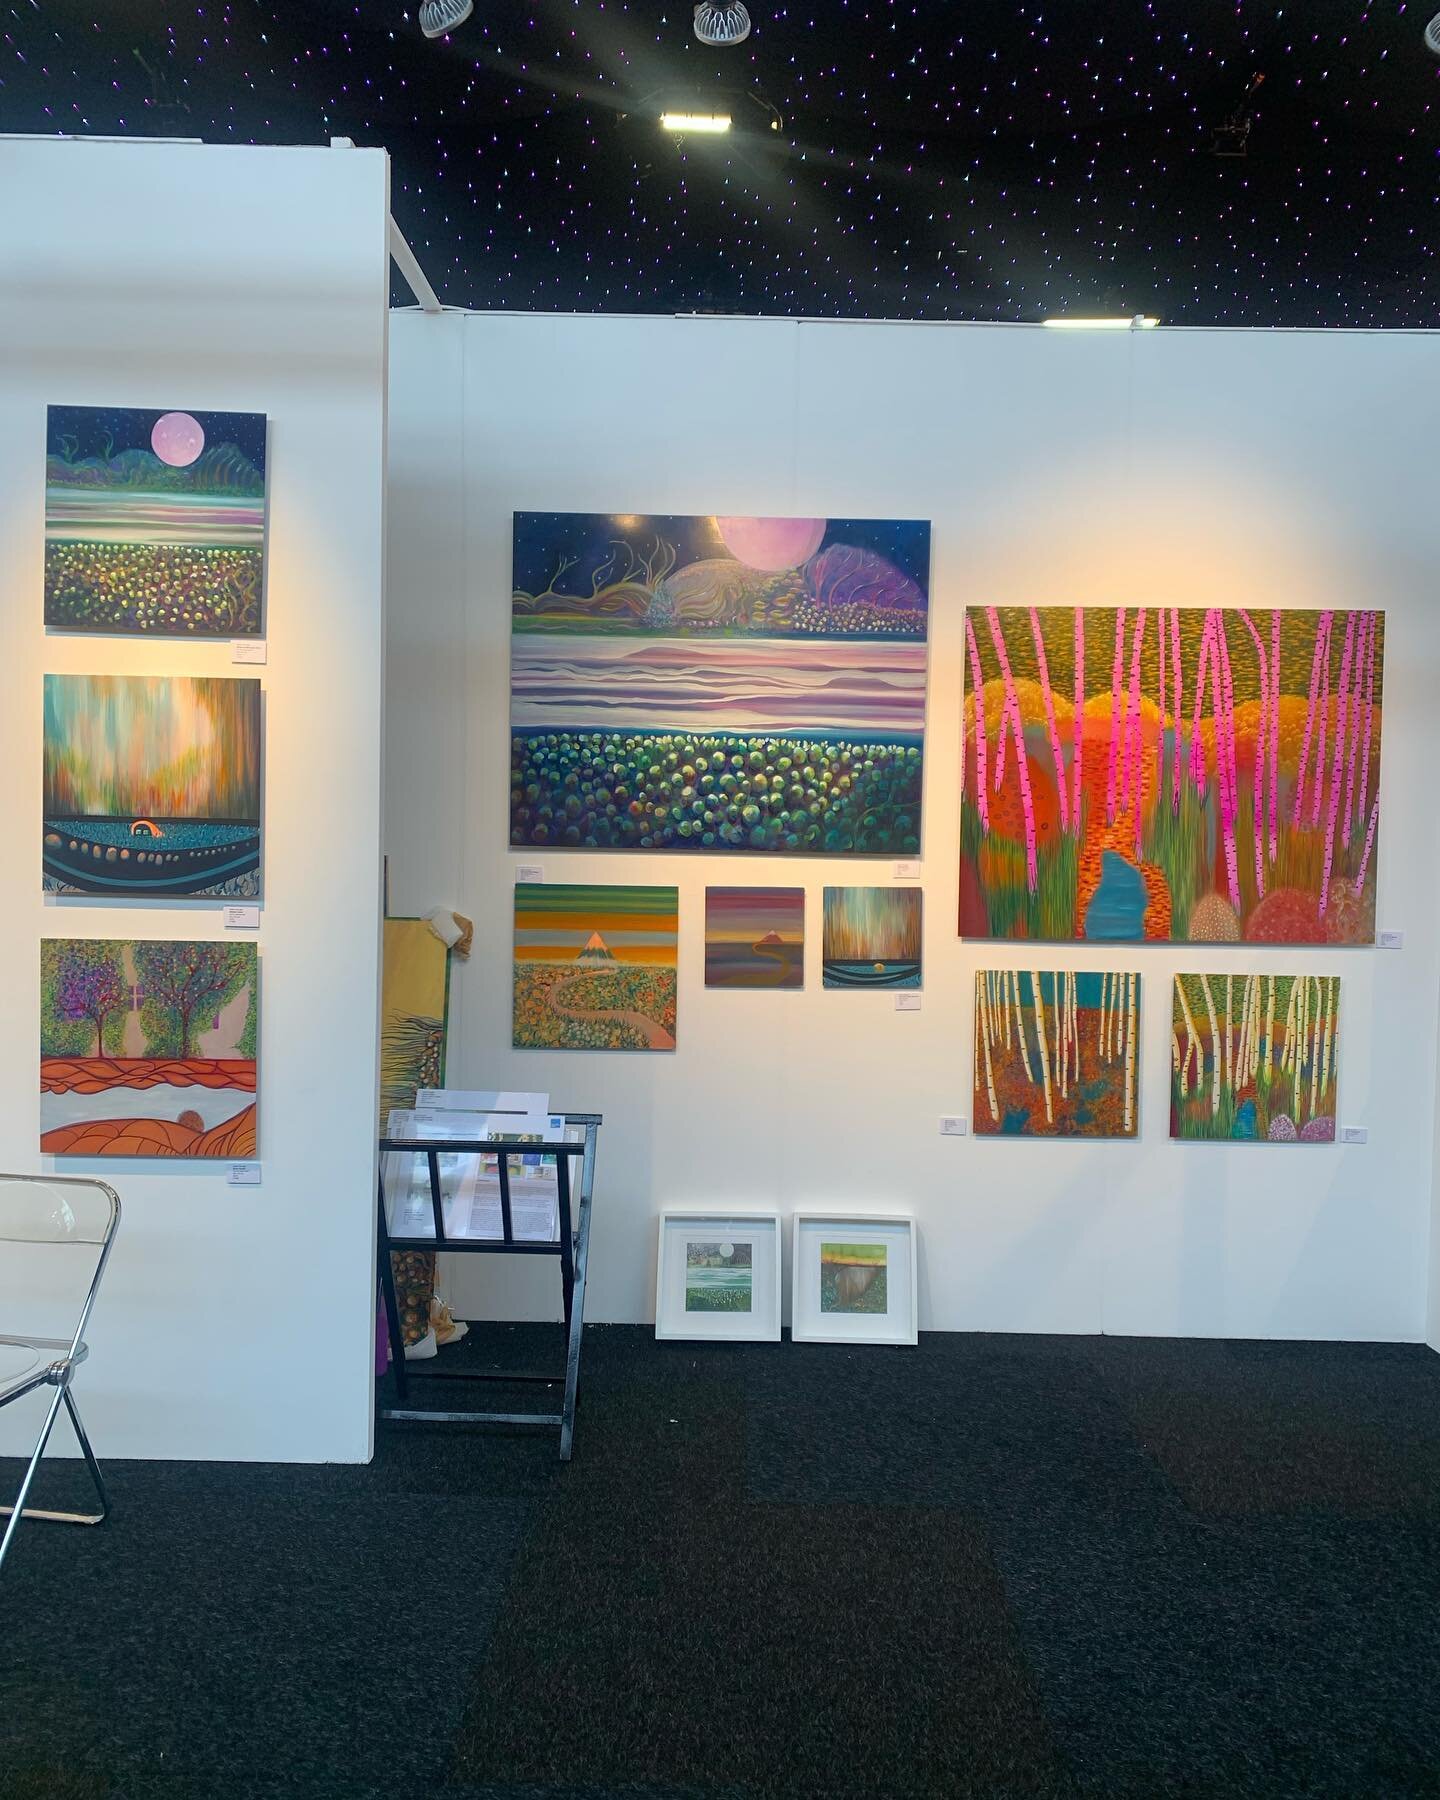 Quick rehang in progress at the @affordableartfairuk with Tripod gallery.
Stand K3
DM for tickets 
Looking forward to the party later on!

#affordableartfair #battersea #newpaintings #helen_brough #contemporary art #contemporarypainting #michaelgoedh